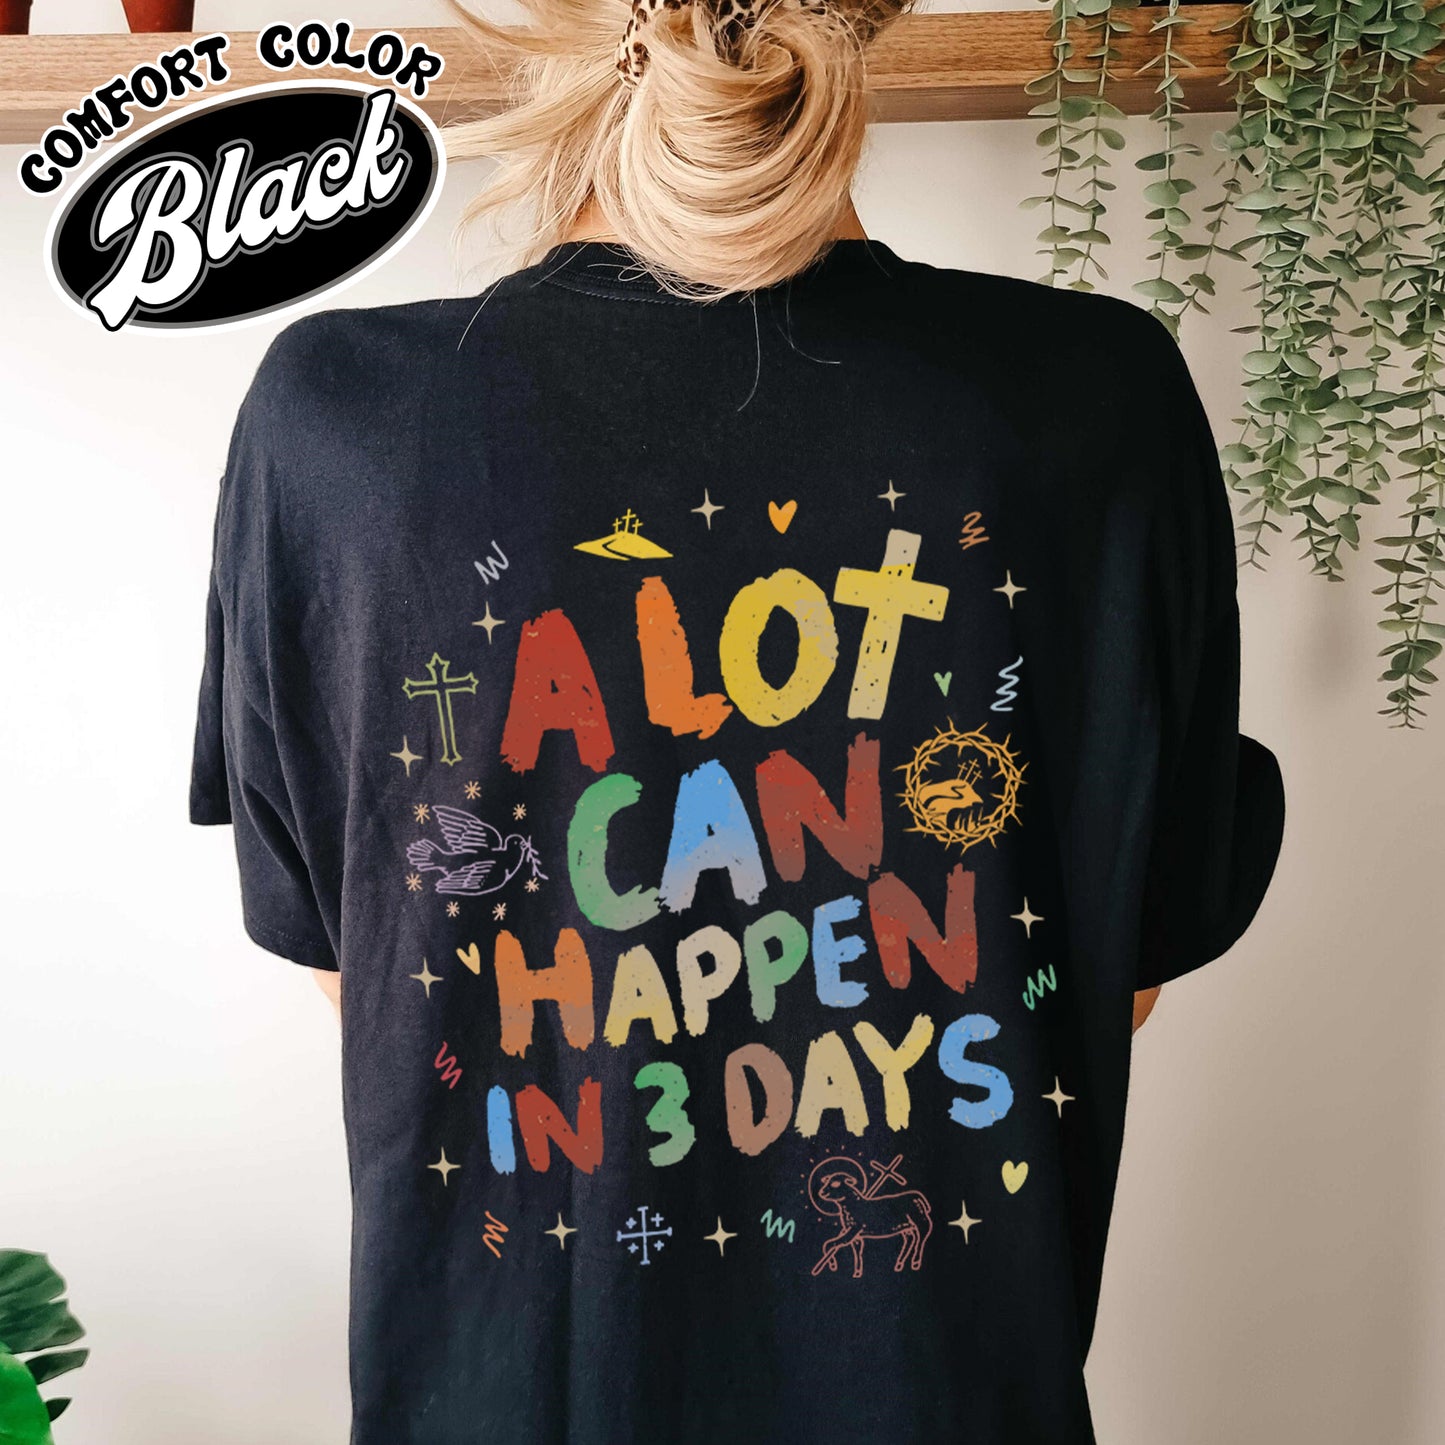 A Lot Can Happen in 3 Days Easter Comfort Color Shirt, Happy Easter, Christian Shirt, He Is Risen Shirt